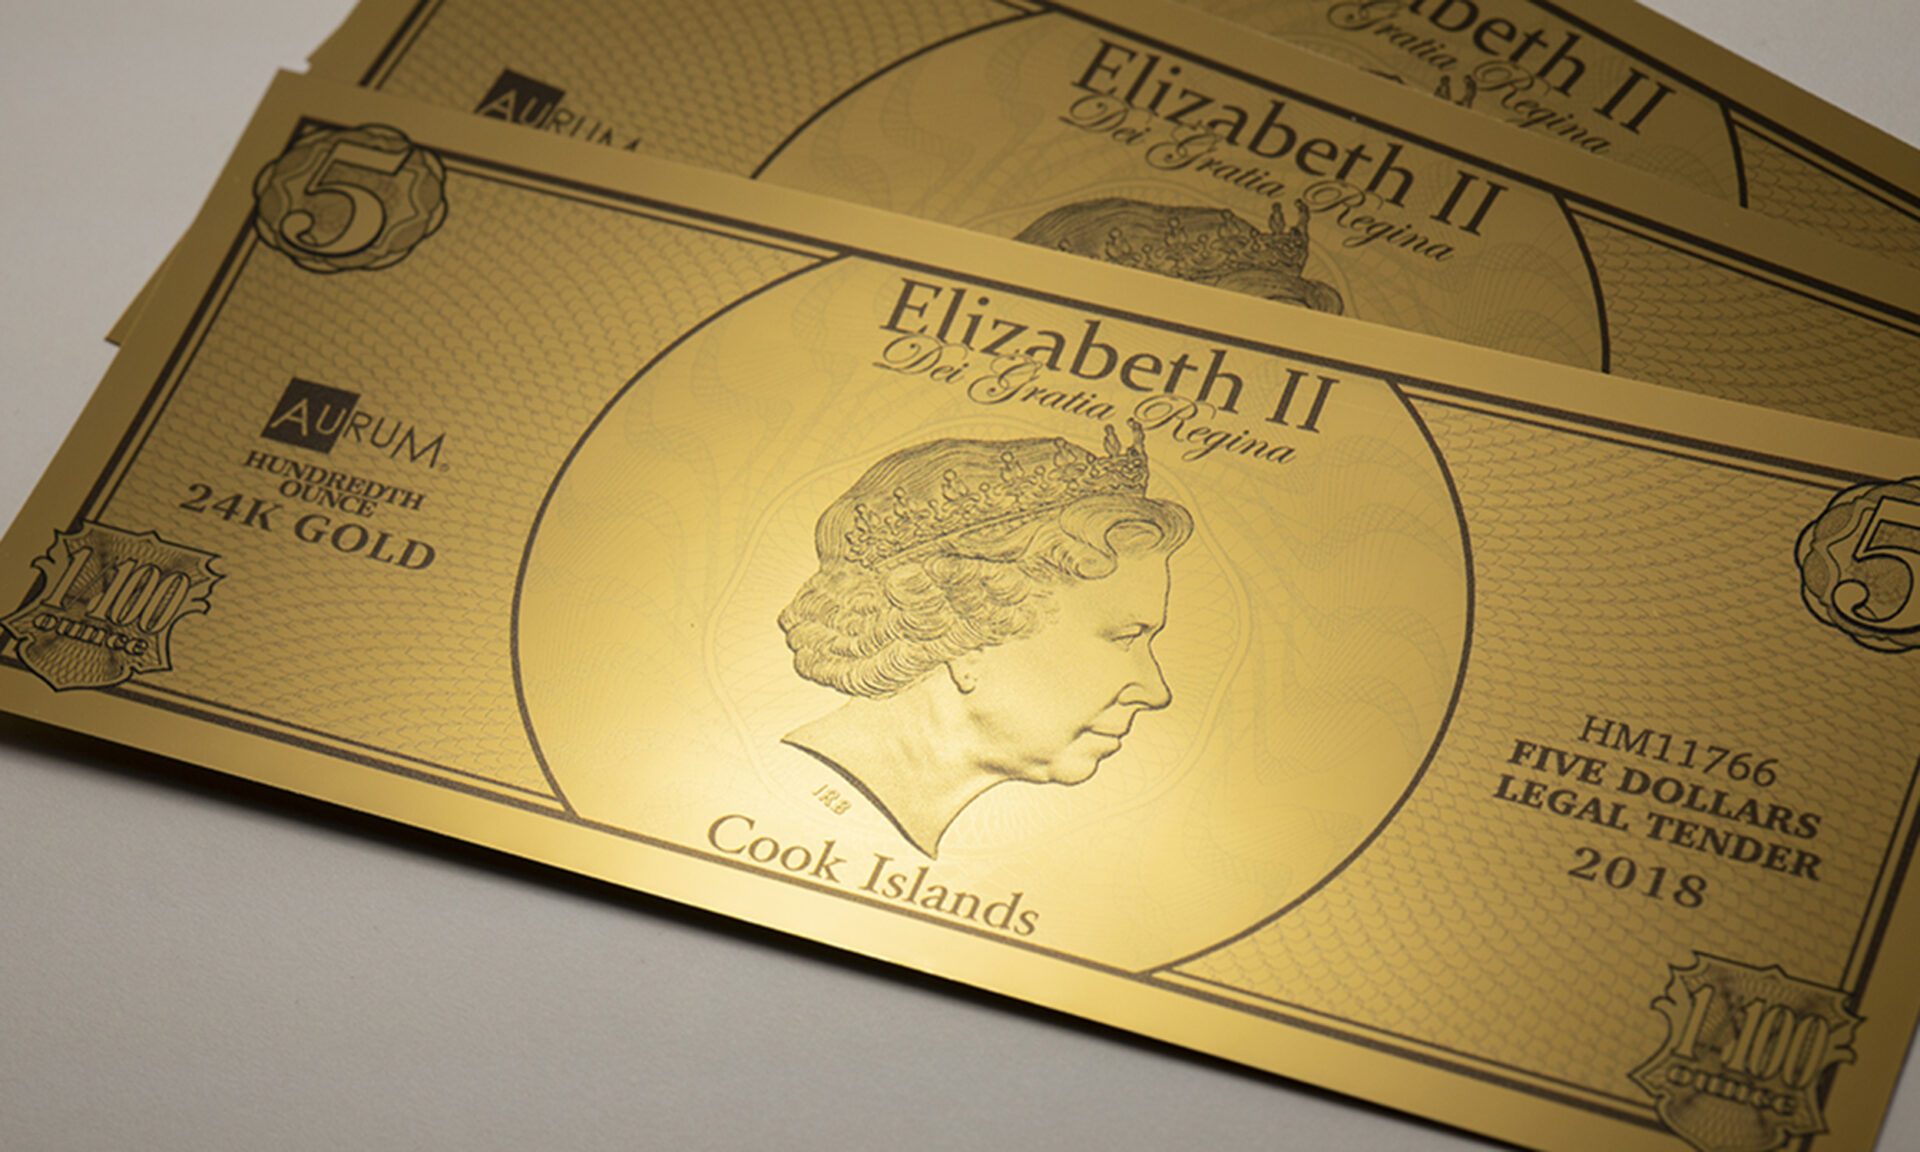 You are currently viewing First Legal Tender Aurum® Currency Manufactured by Valaurum